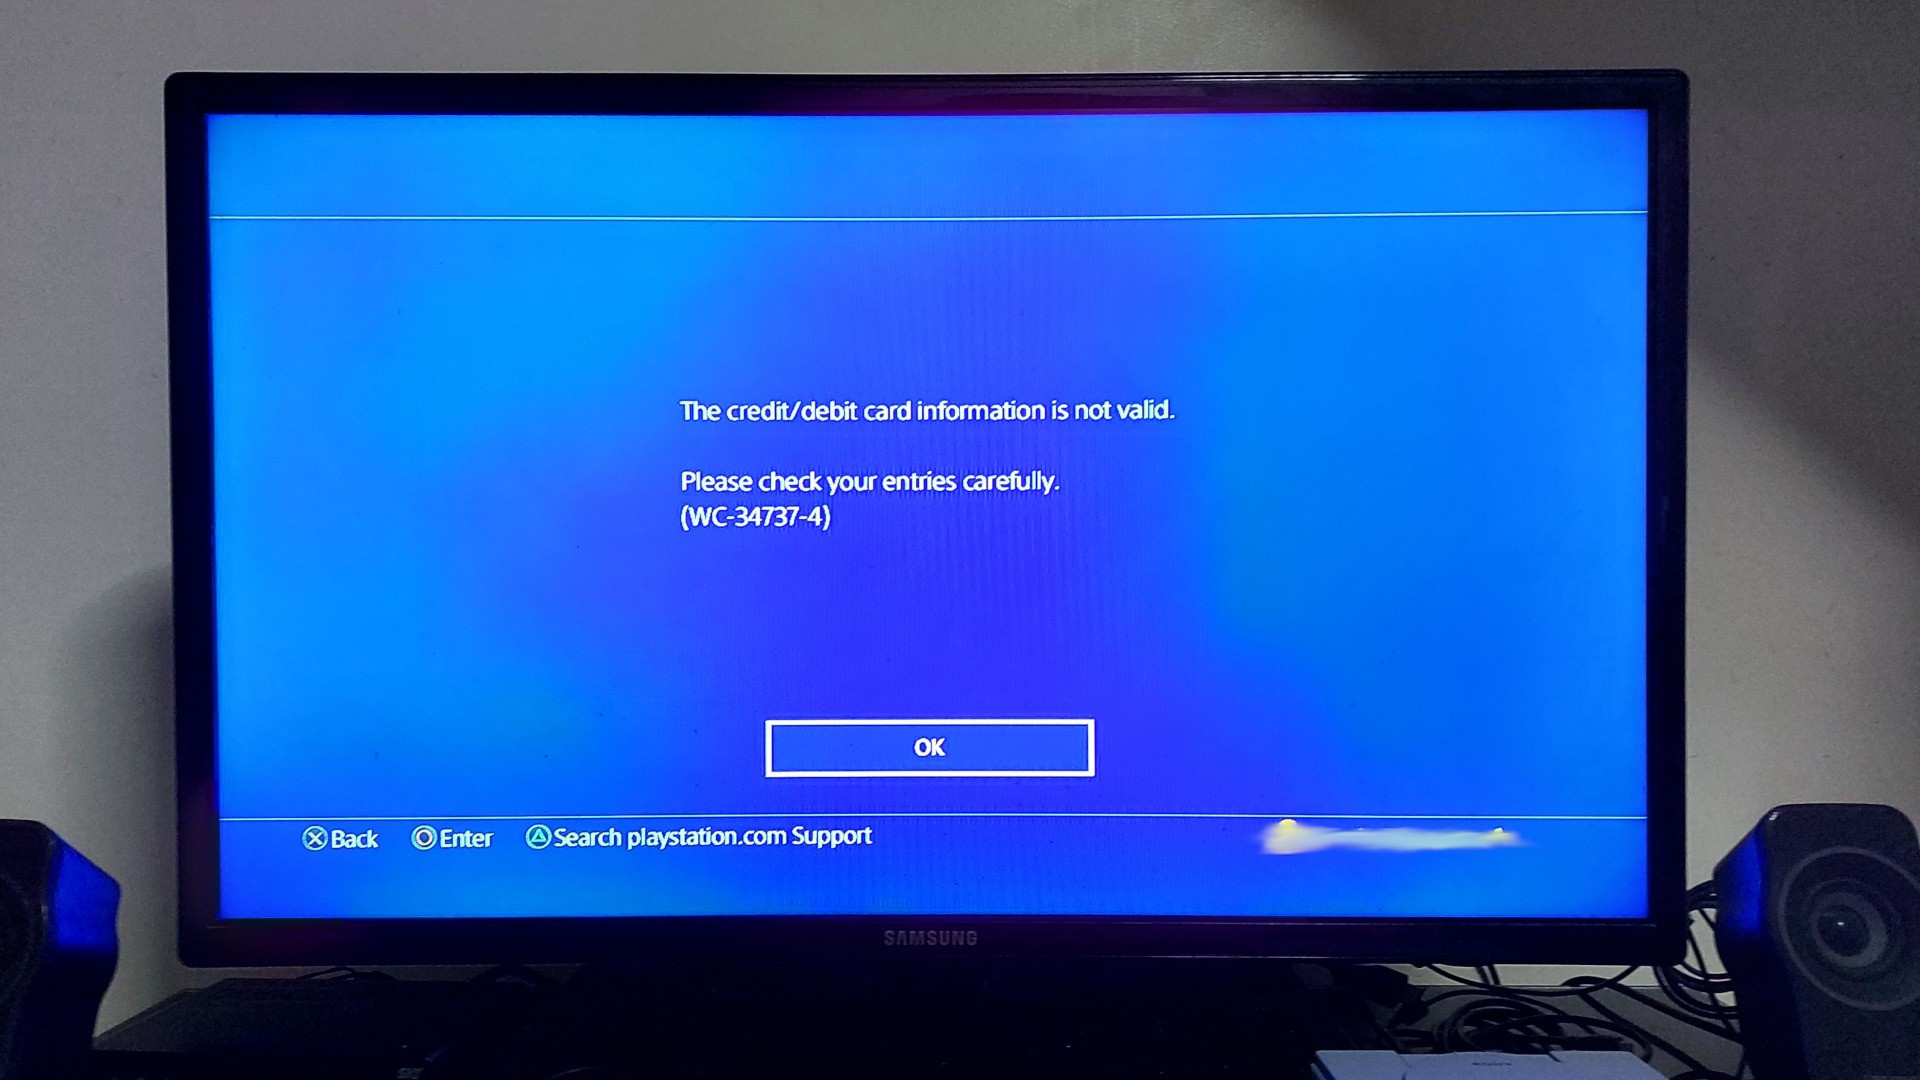 Looks like PH Credit Cards are working on SG PlayStation Store